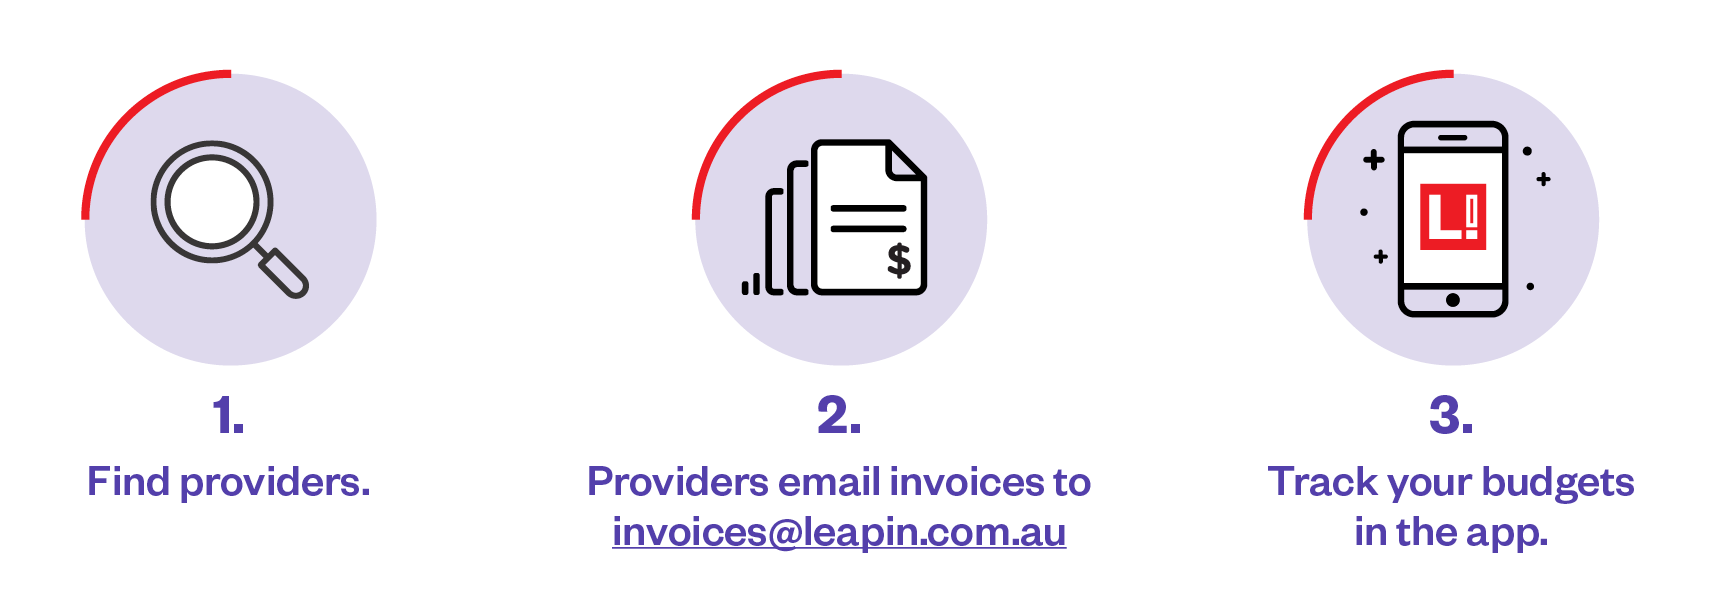 Getting started infographic: 1. Find providers; 2. Providers email invoices to invoices@leapin.com.au; 3. Track your budgets in the app.